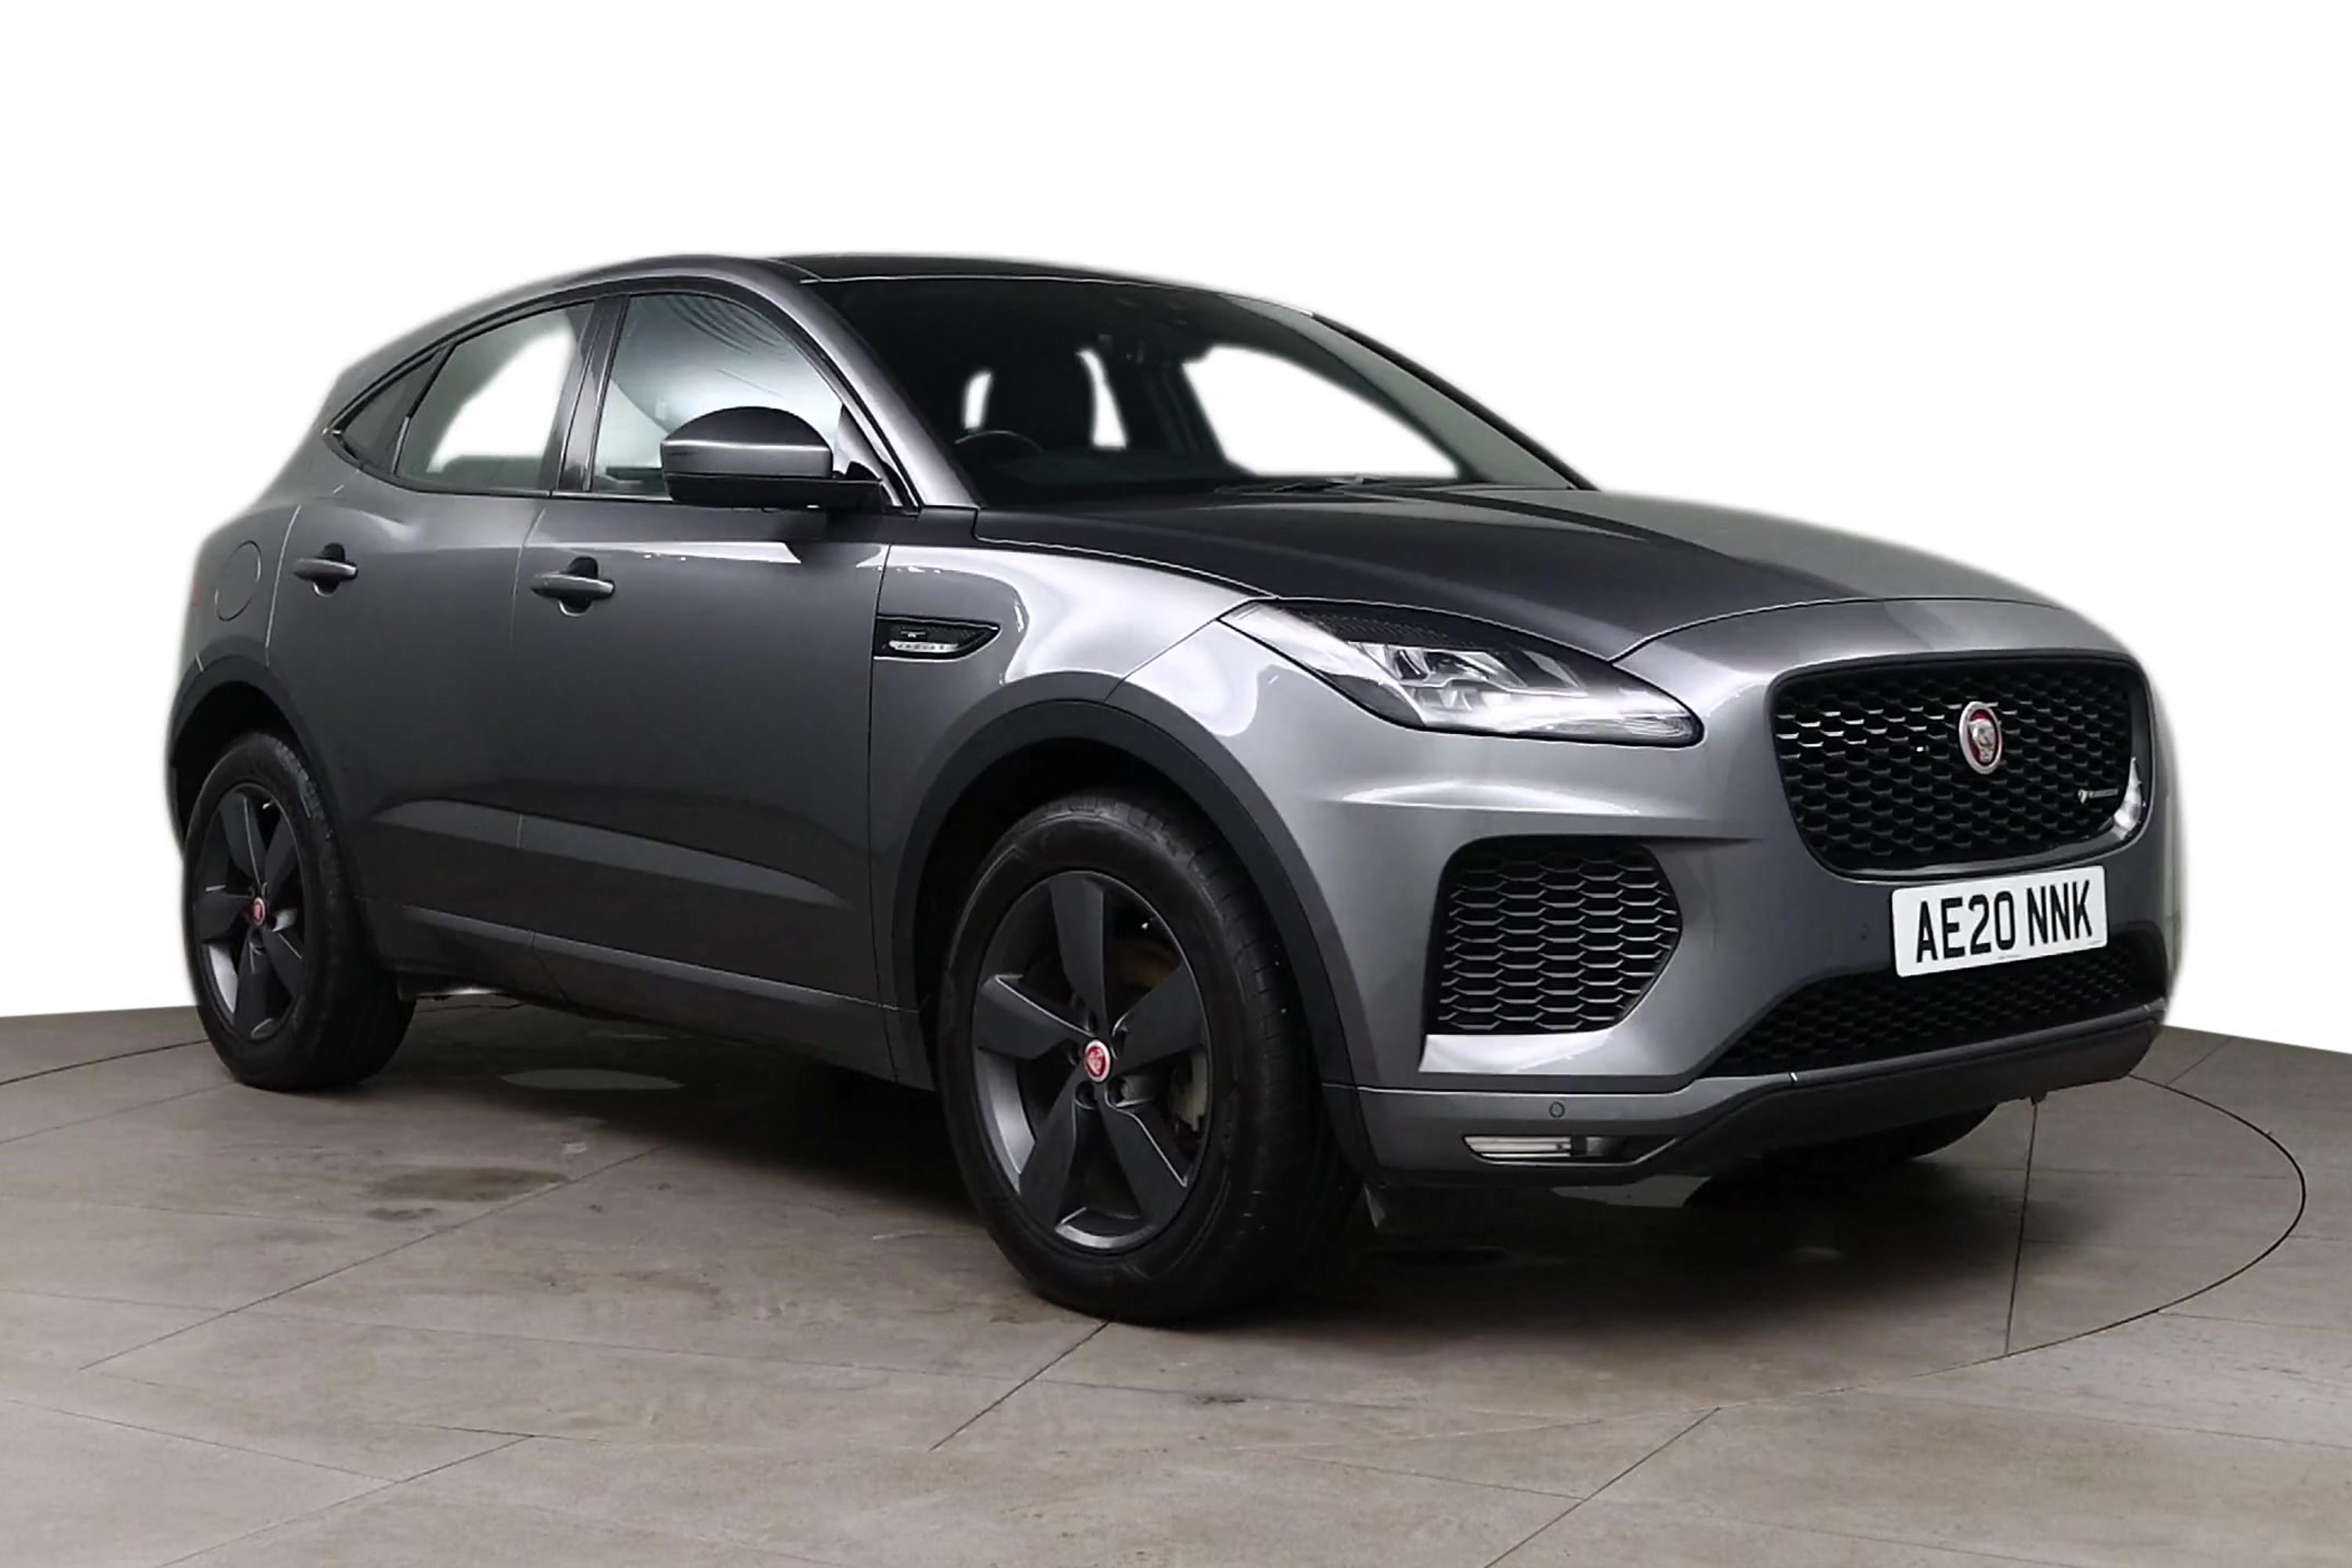 2020 used Jaguar E-Pace 2.0d Chequered Flag Edition 5dr Auto